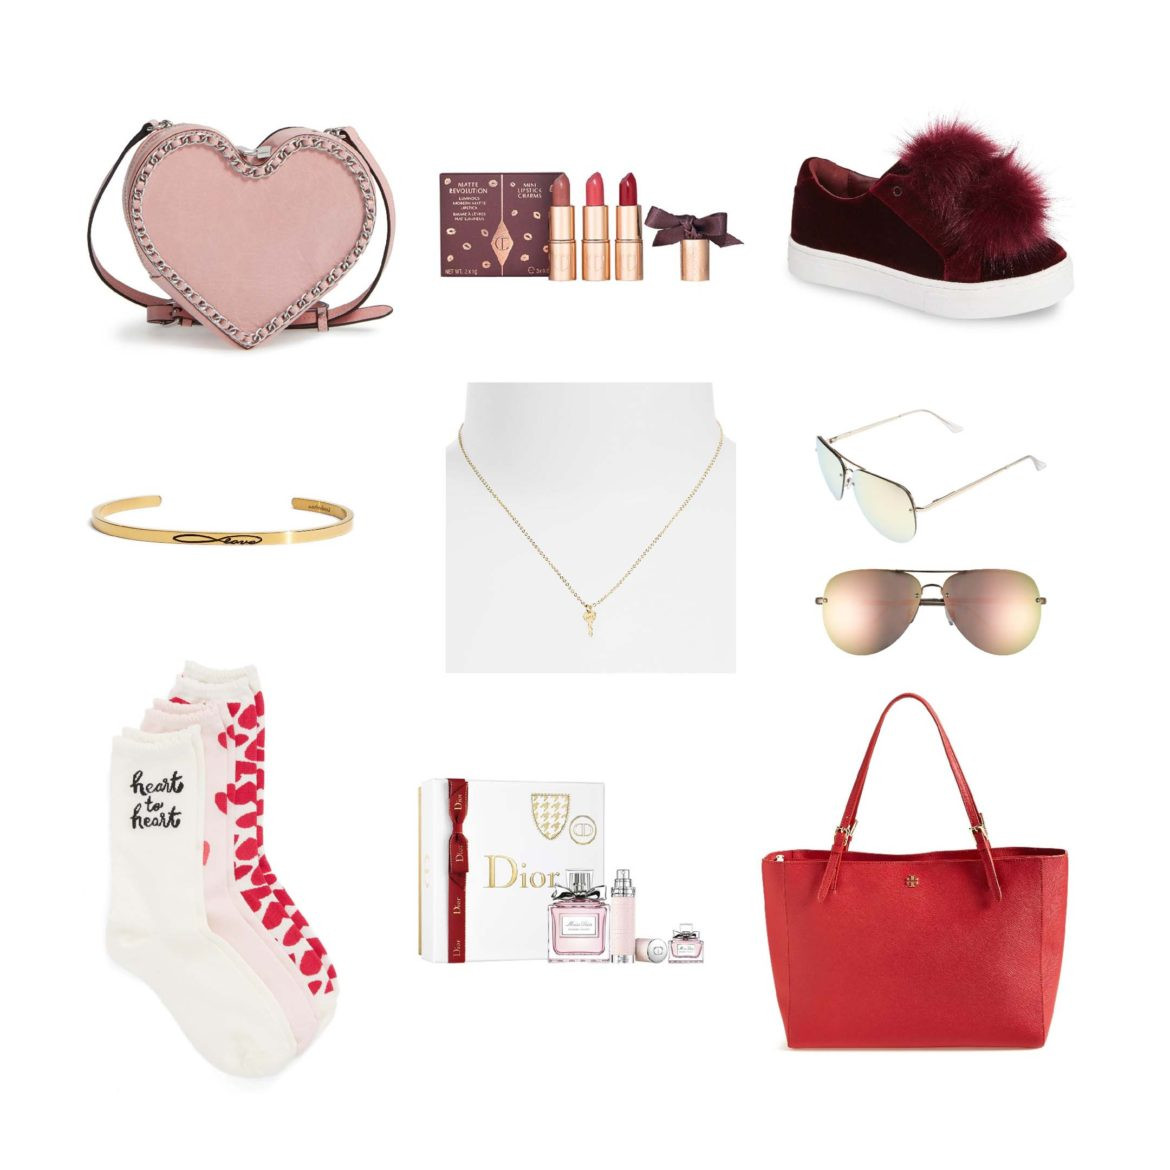 Gift Ideas For Tomboy Girlfriend
 Wishlist Wednesday Valentine s Day Gifts The Trendy Tomboy